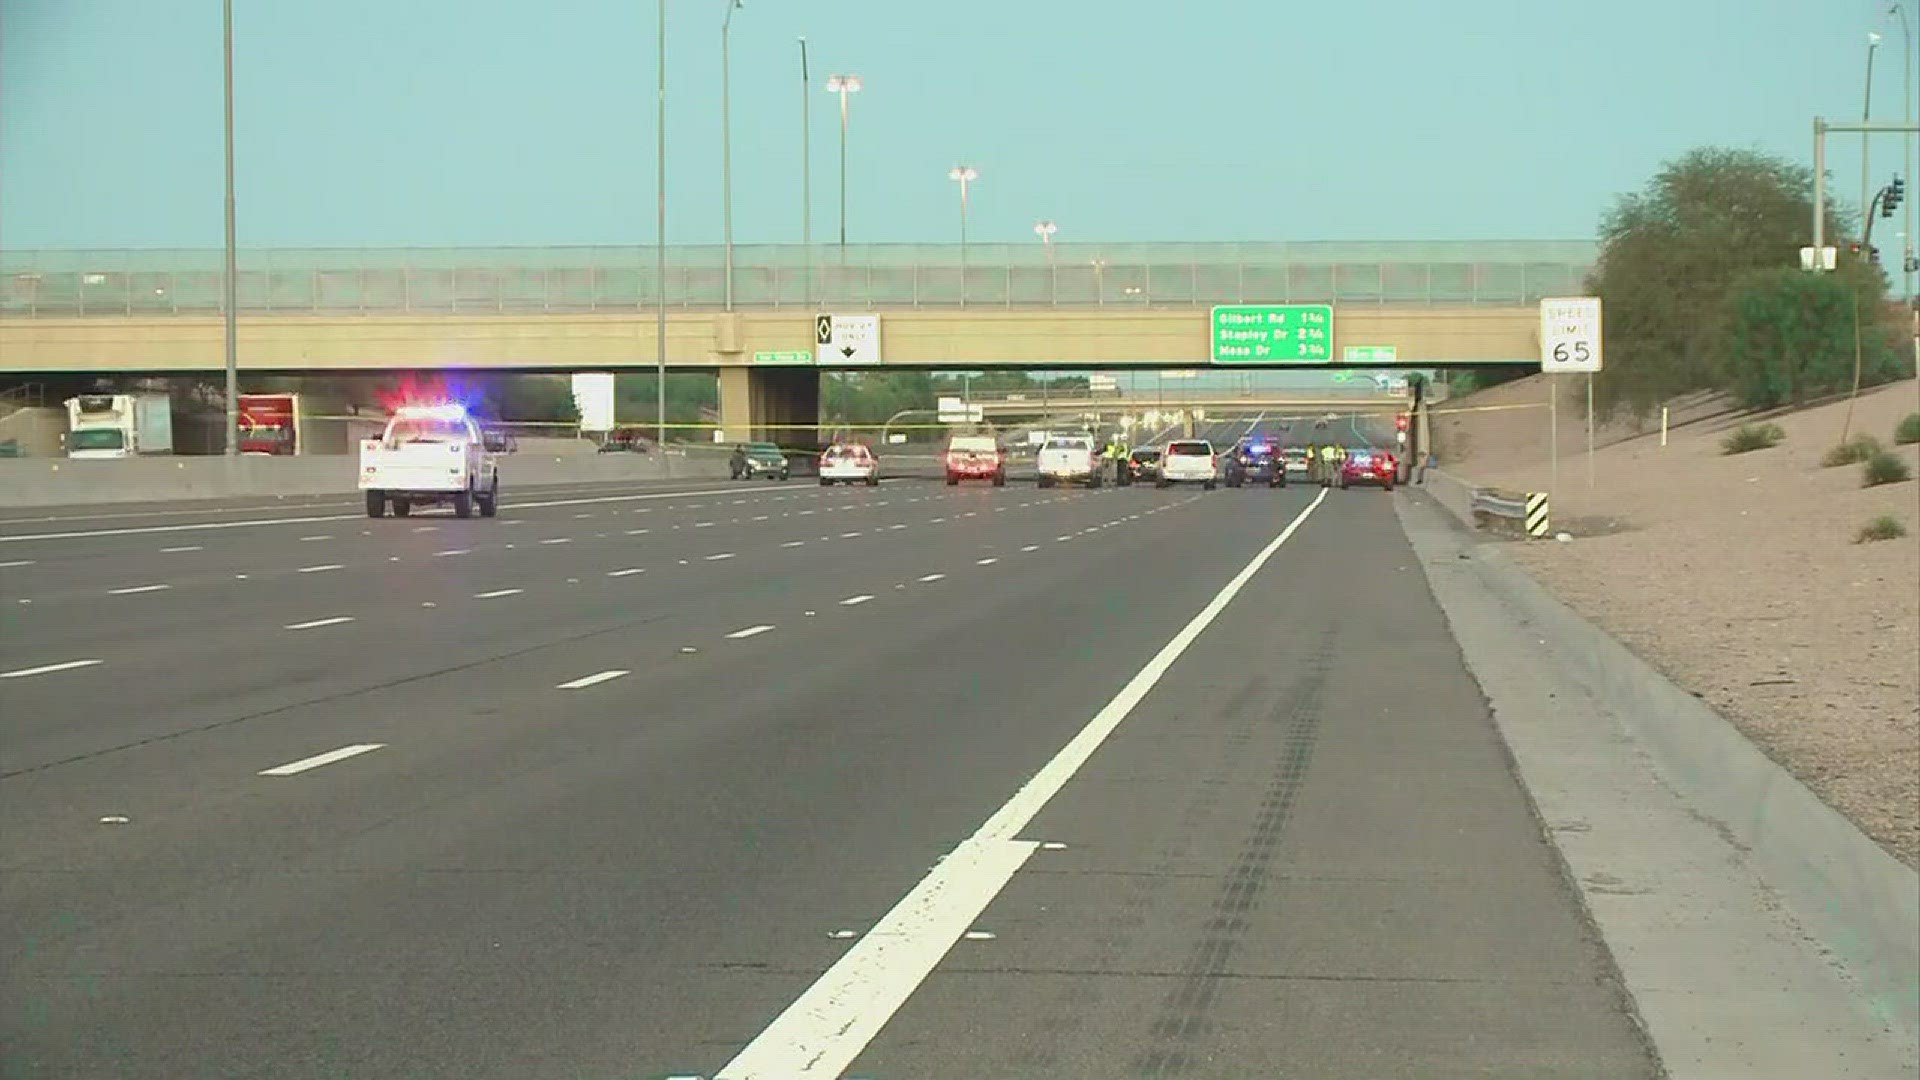 DPS said the man was hit on the side of the freeway.